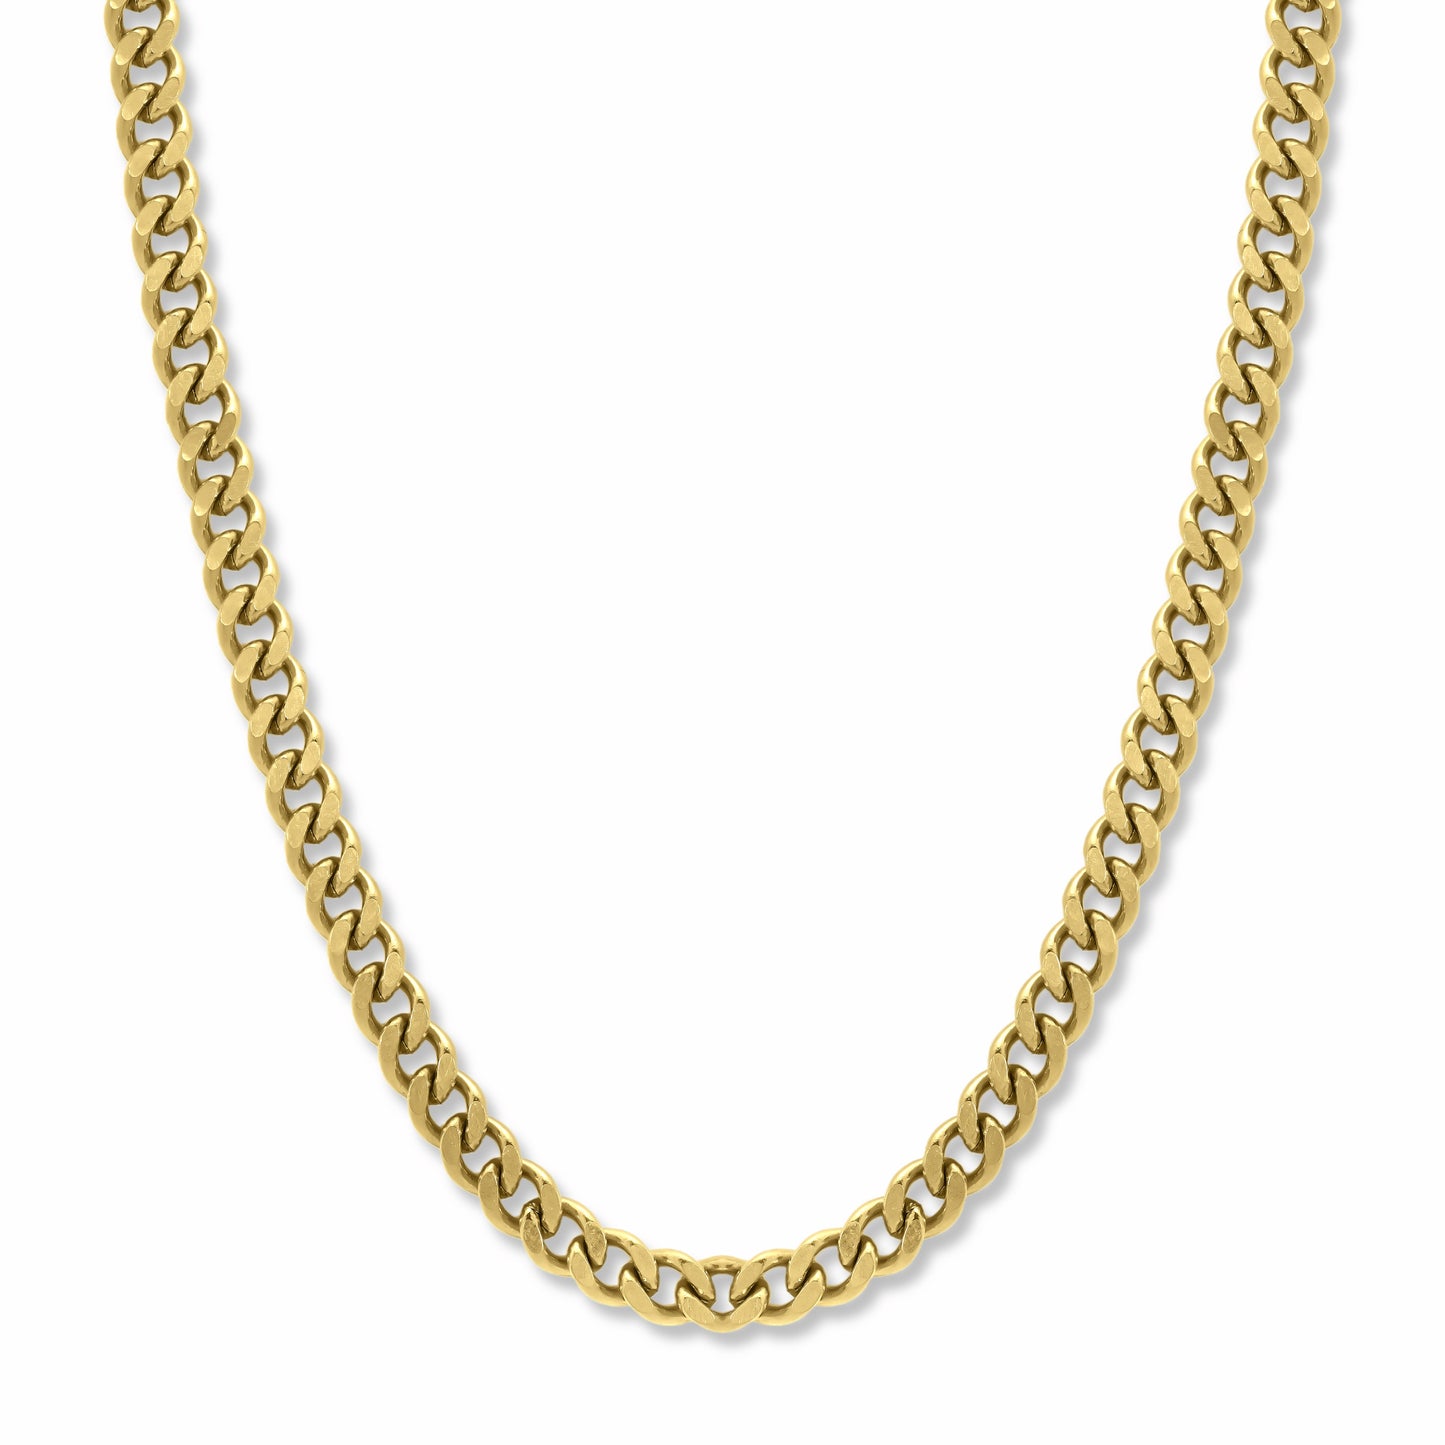 Cuban Chain Gold 5mm on white background. Luxury, lifetime Men's Jewellery.